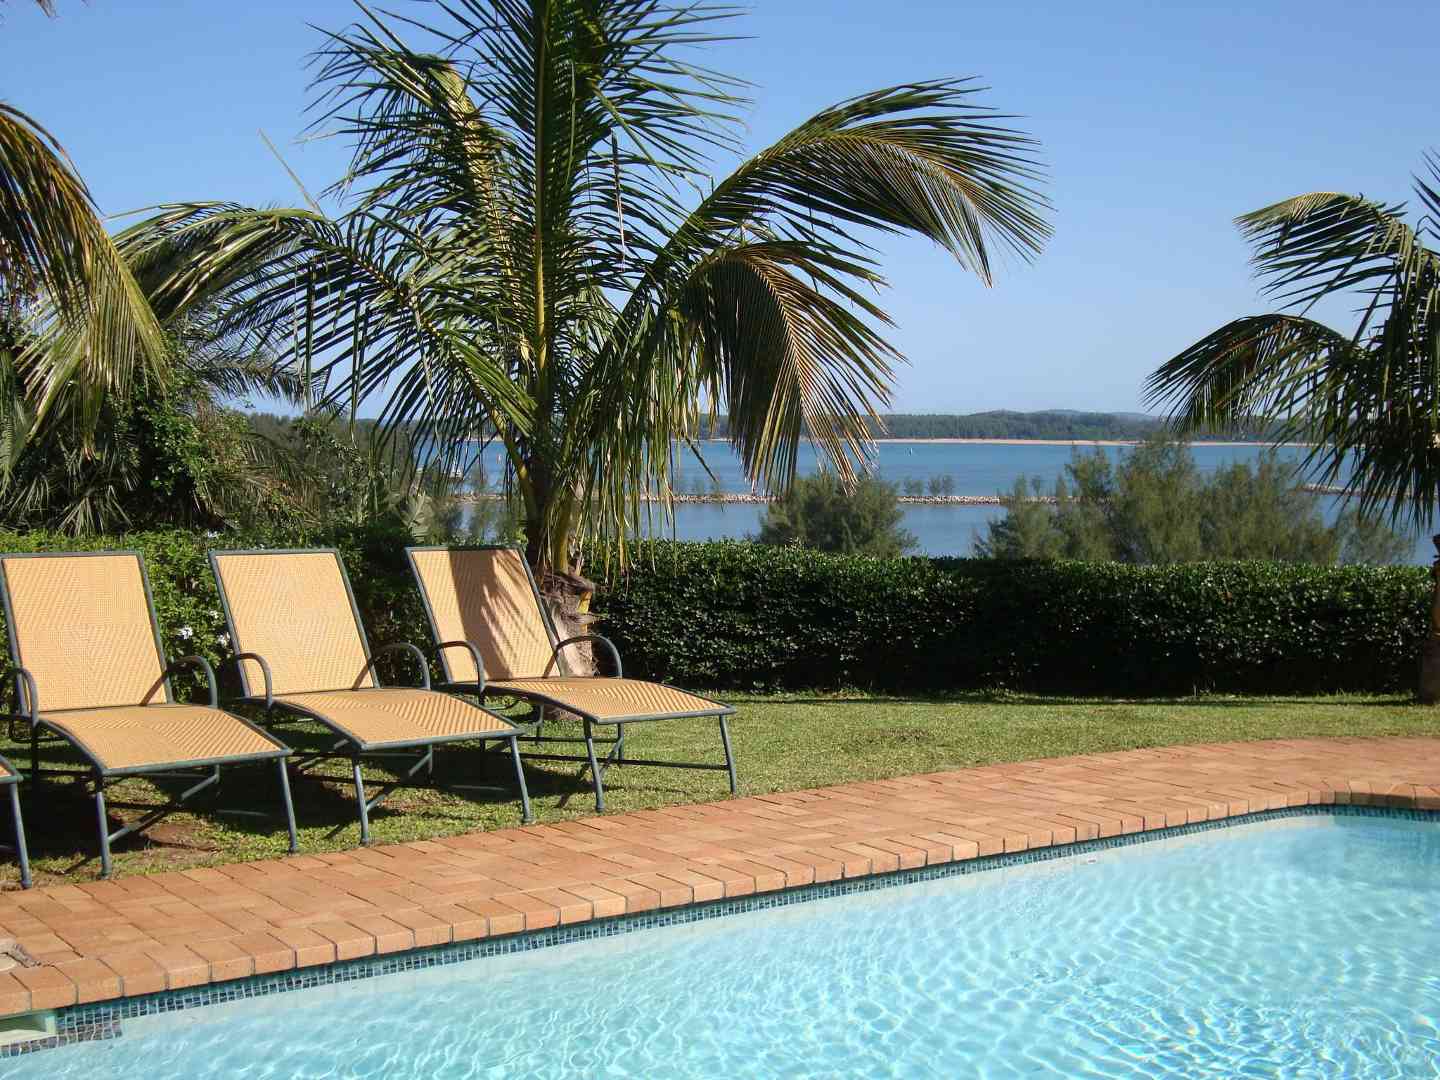 The Ridge Guest House- Jack's Corner, Richards Bay, South Africa